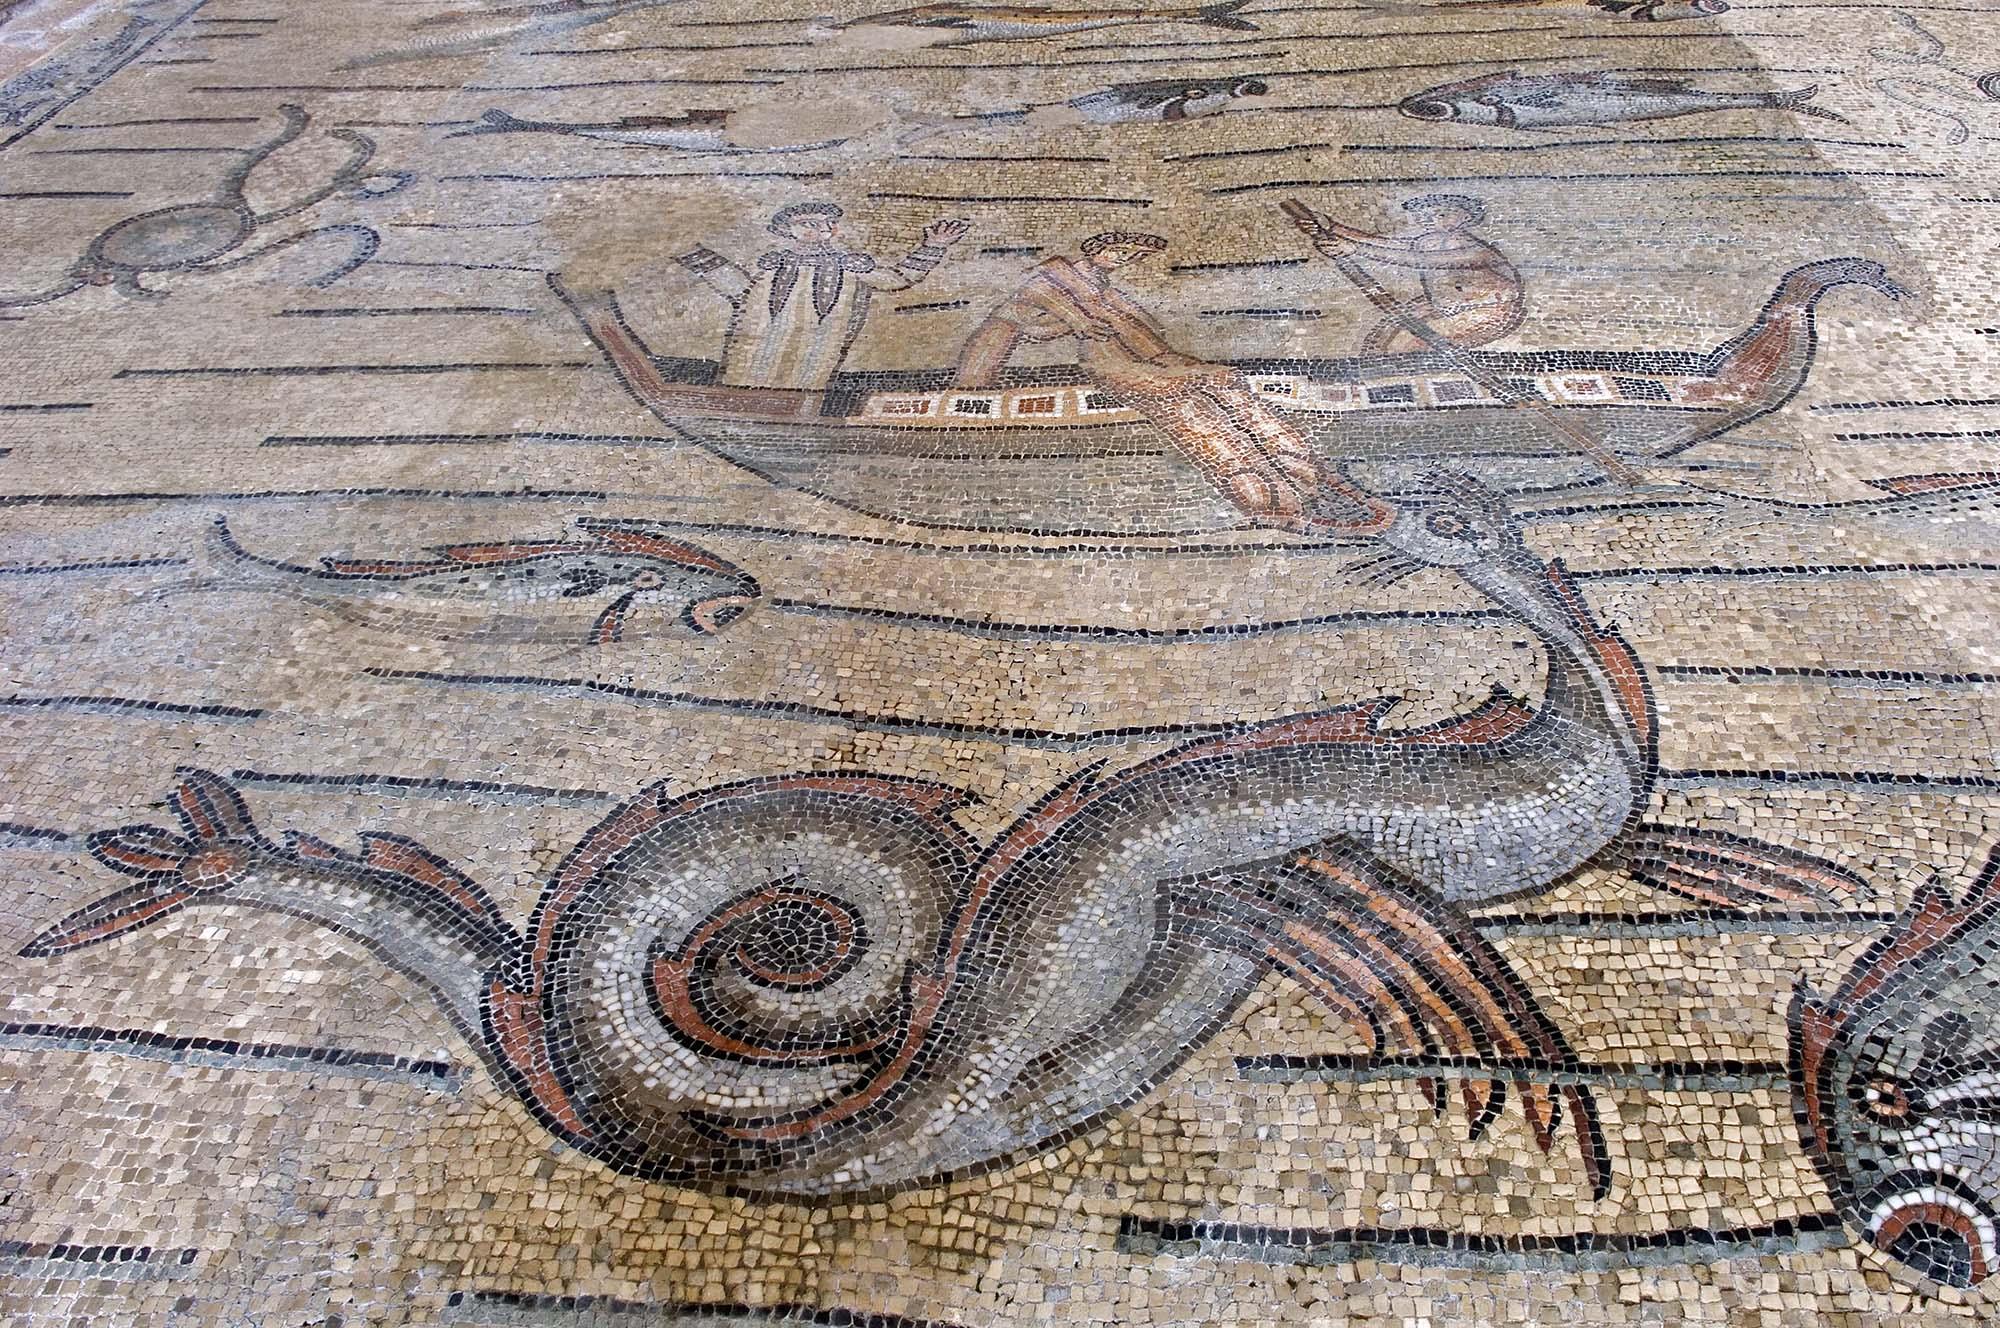 In this detail of the cycle of Jonah, the prophet is being thrown from a boat into the sea and swallowed by a sea monster. – © Gianluca Baronchelli